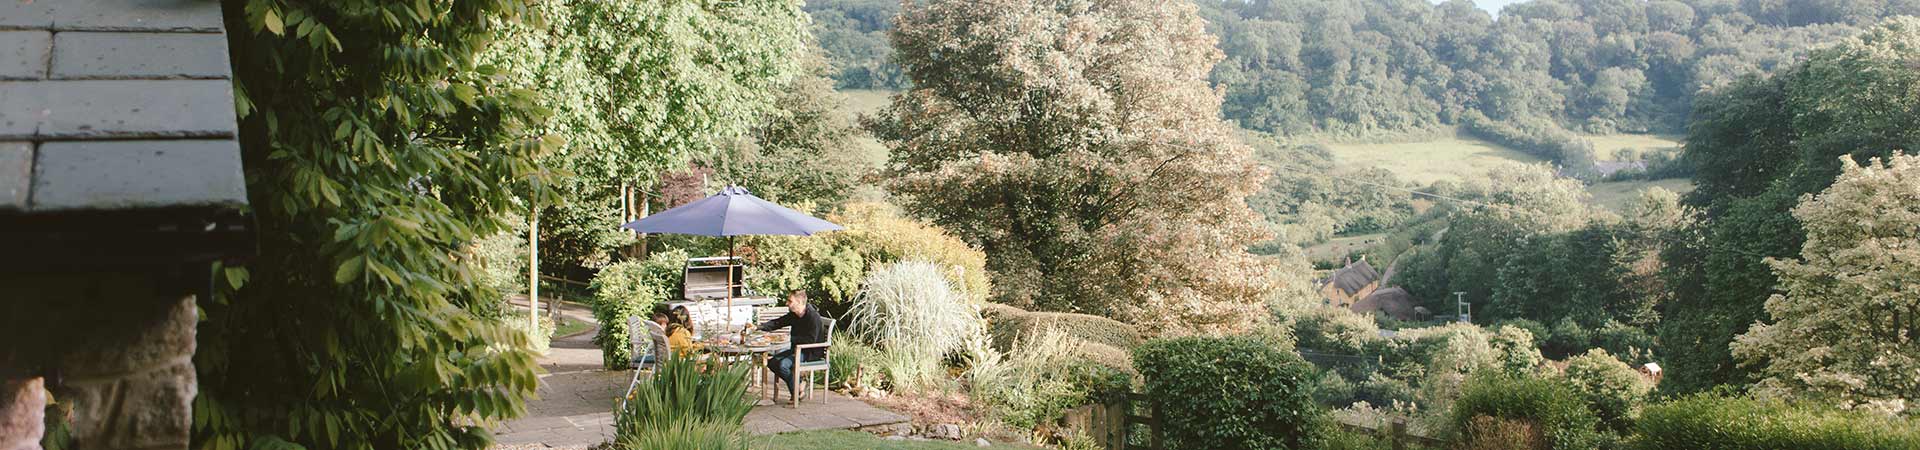 Holiday cottages for June in Herefordshire